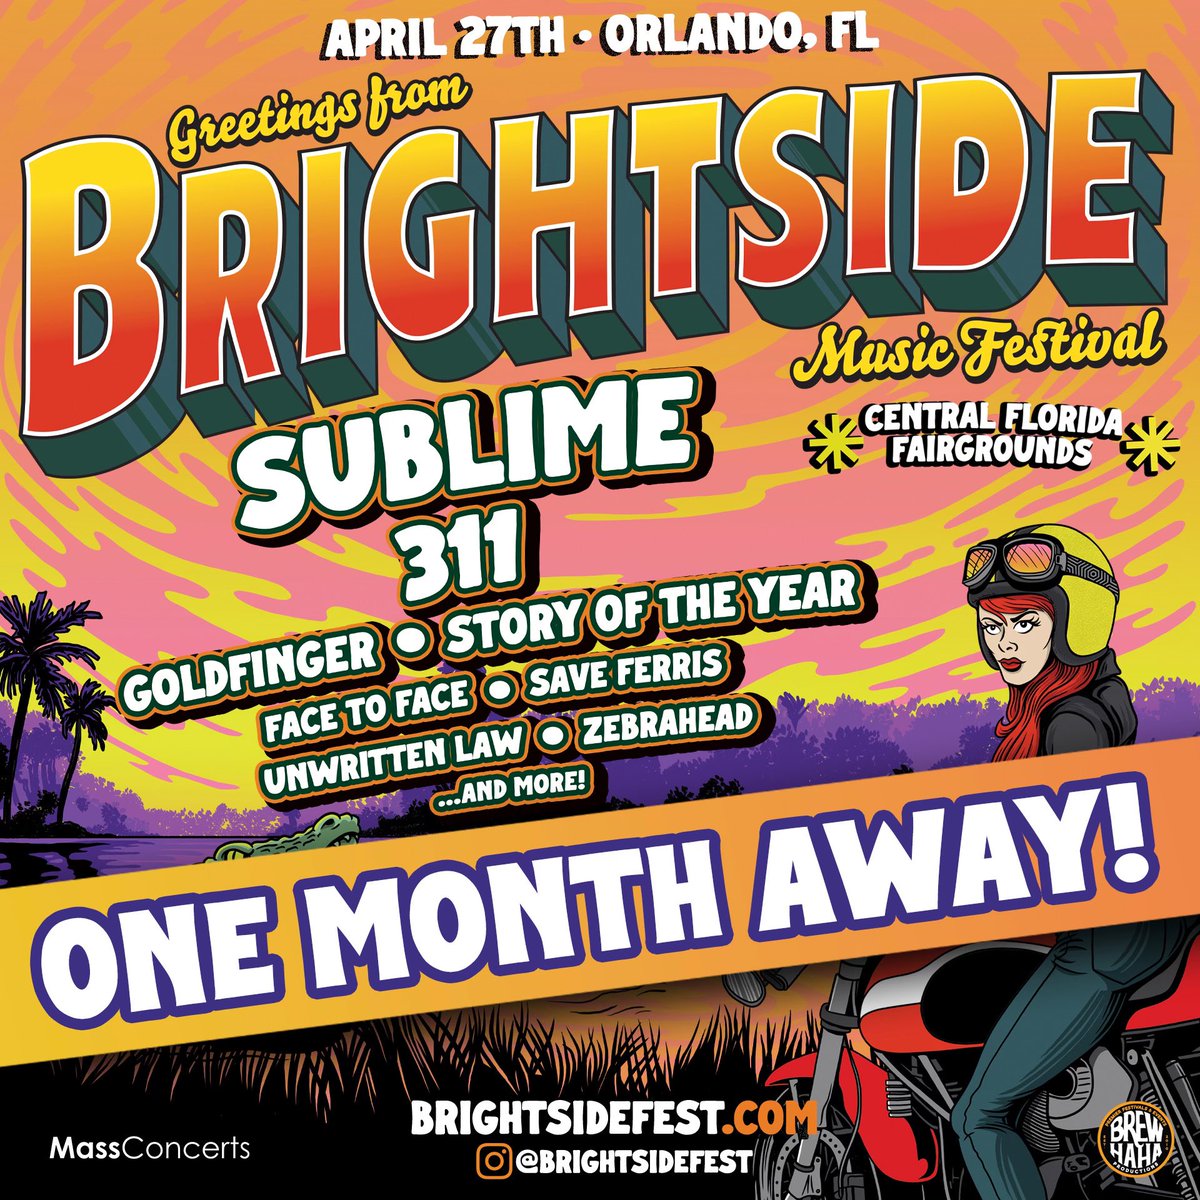 One month until @brightsidefest_! Orlando, who’s coming out? 🤘 Tickets available now: brewhahaproductions.ticketspice.com/brightside-orl…